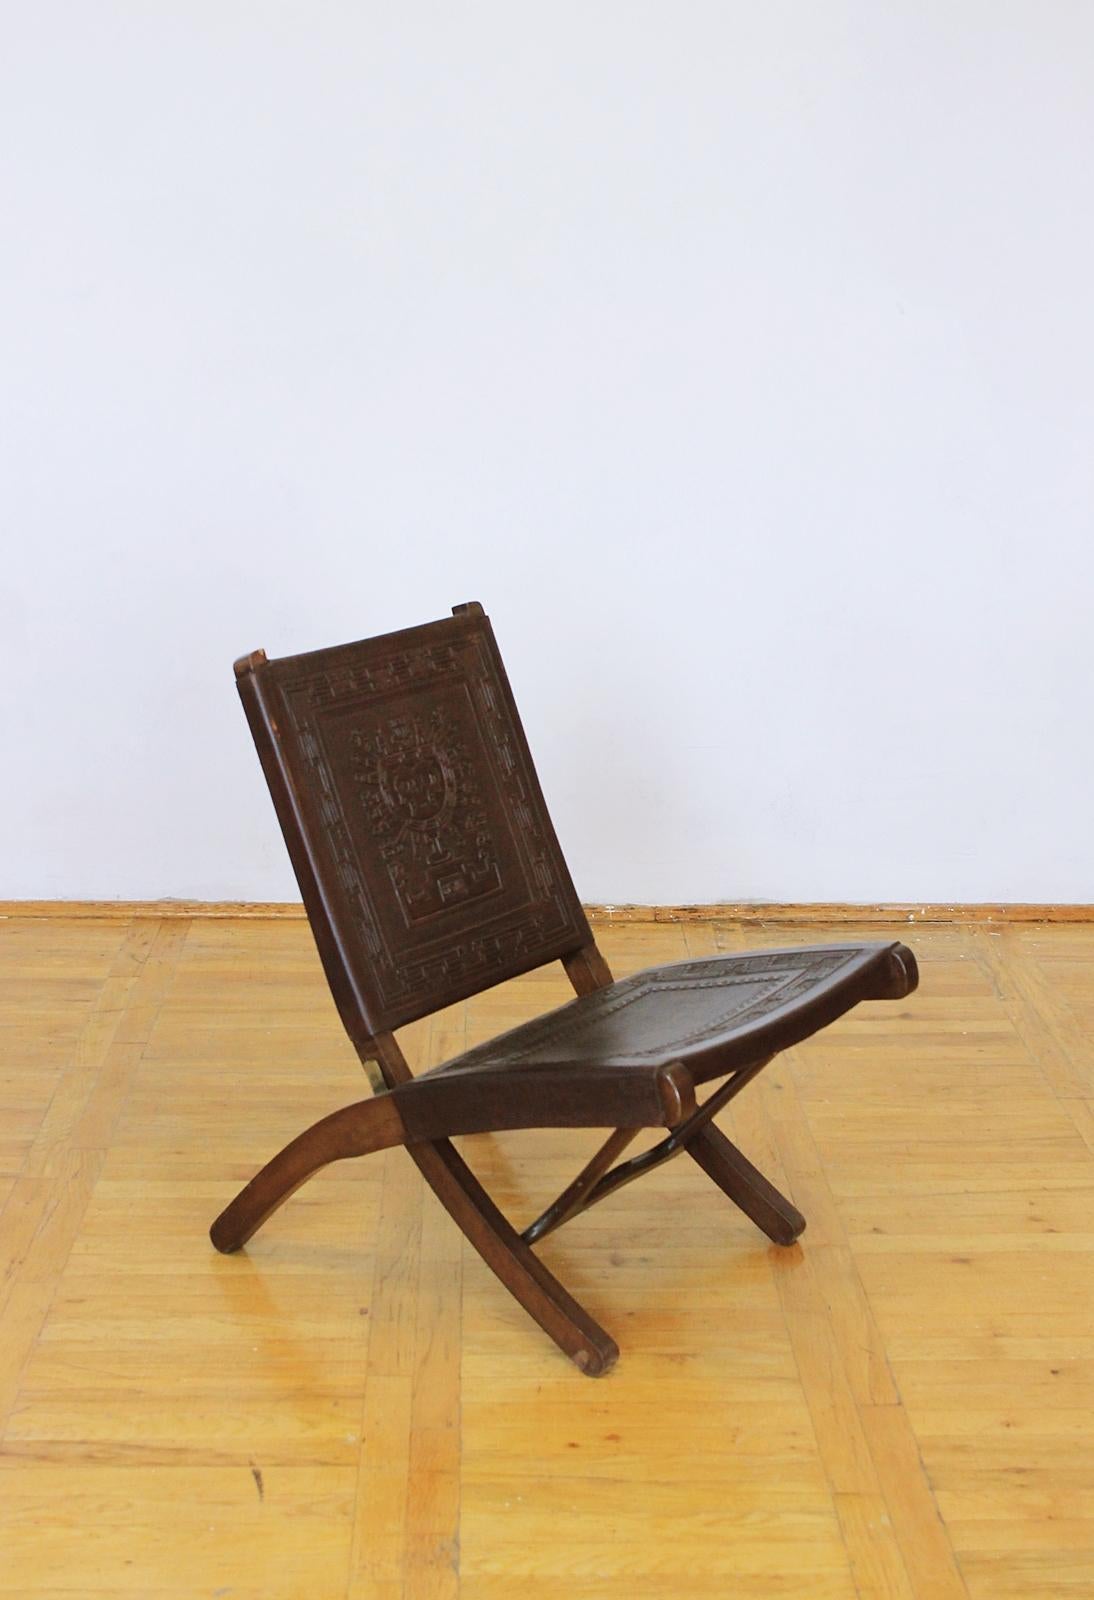 Hand-Crafted Midcentury Peruvian Tooled Leather Folding Chair, 1970